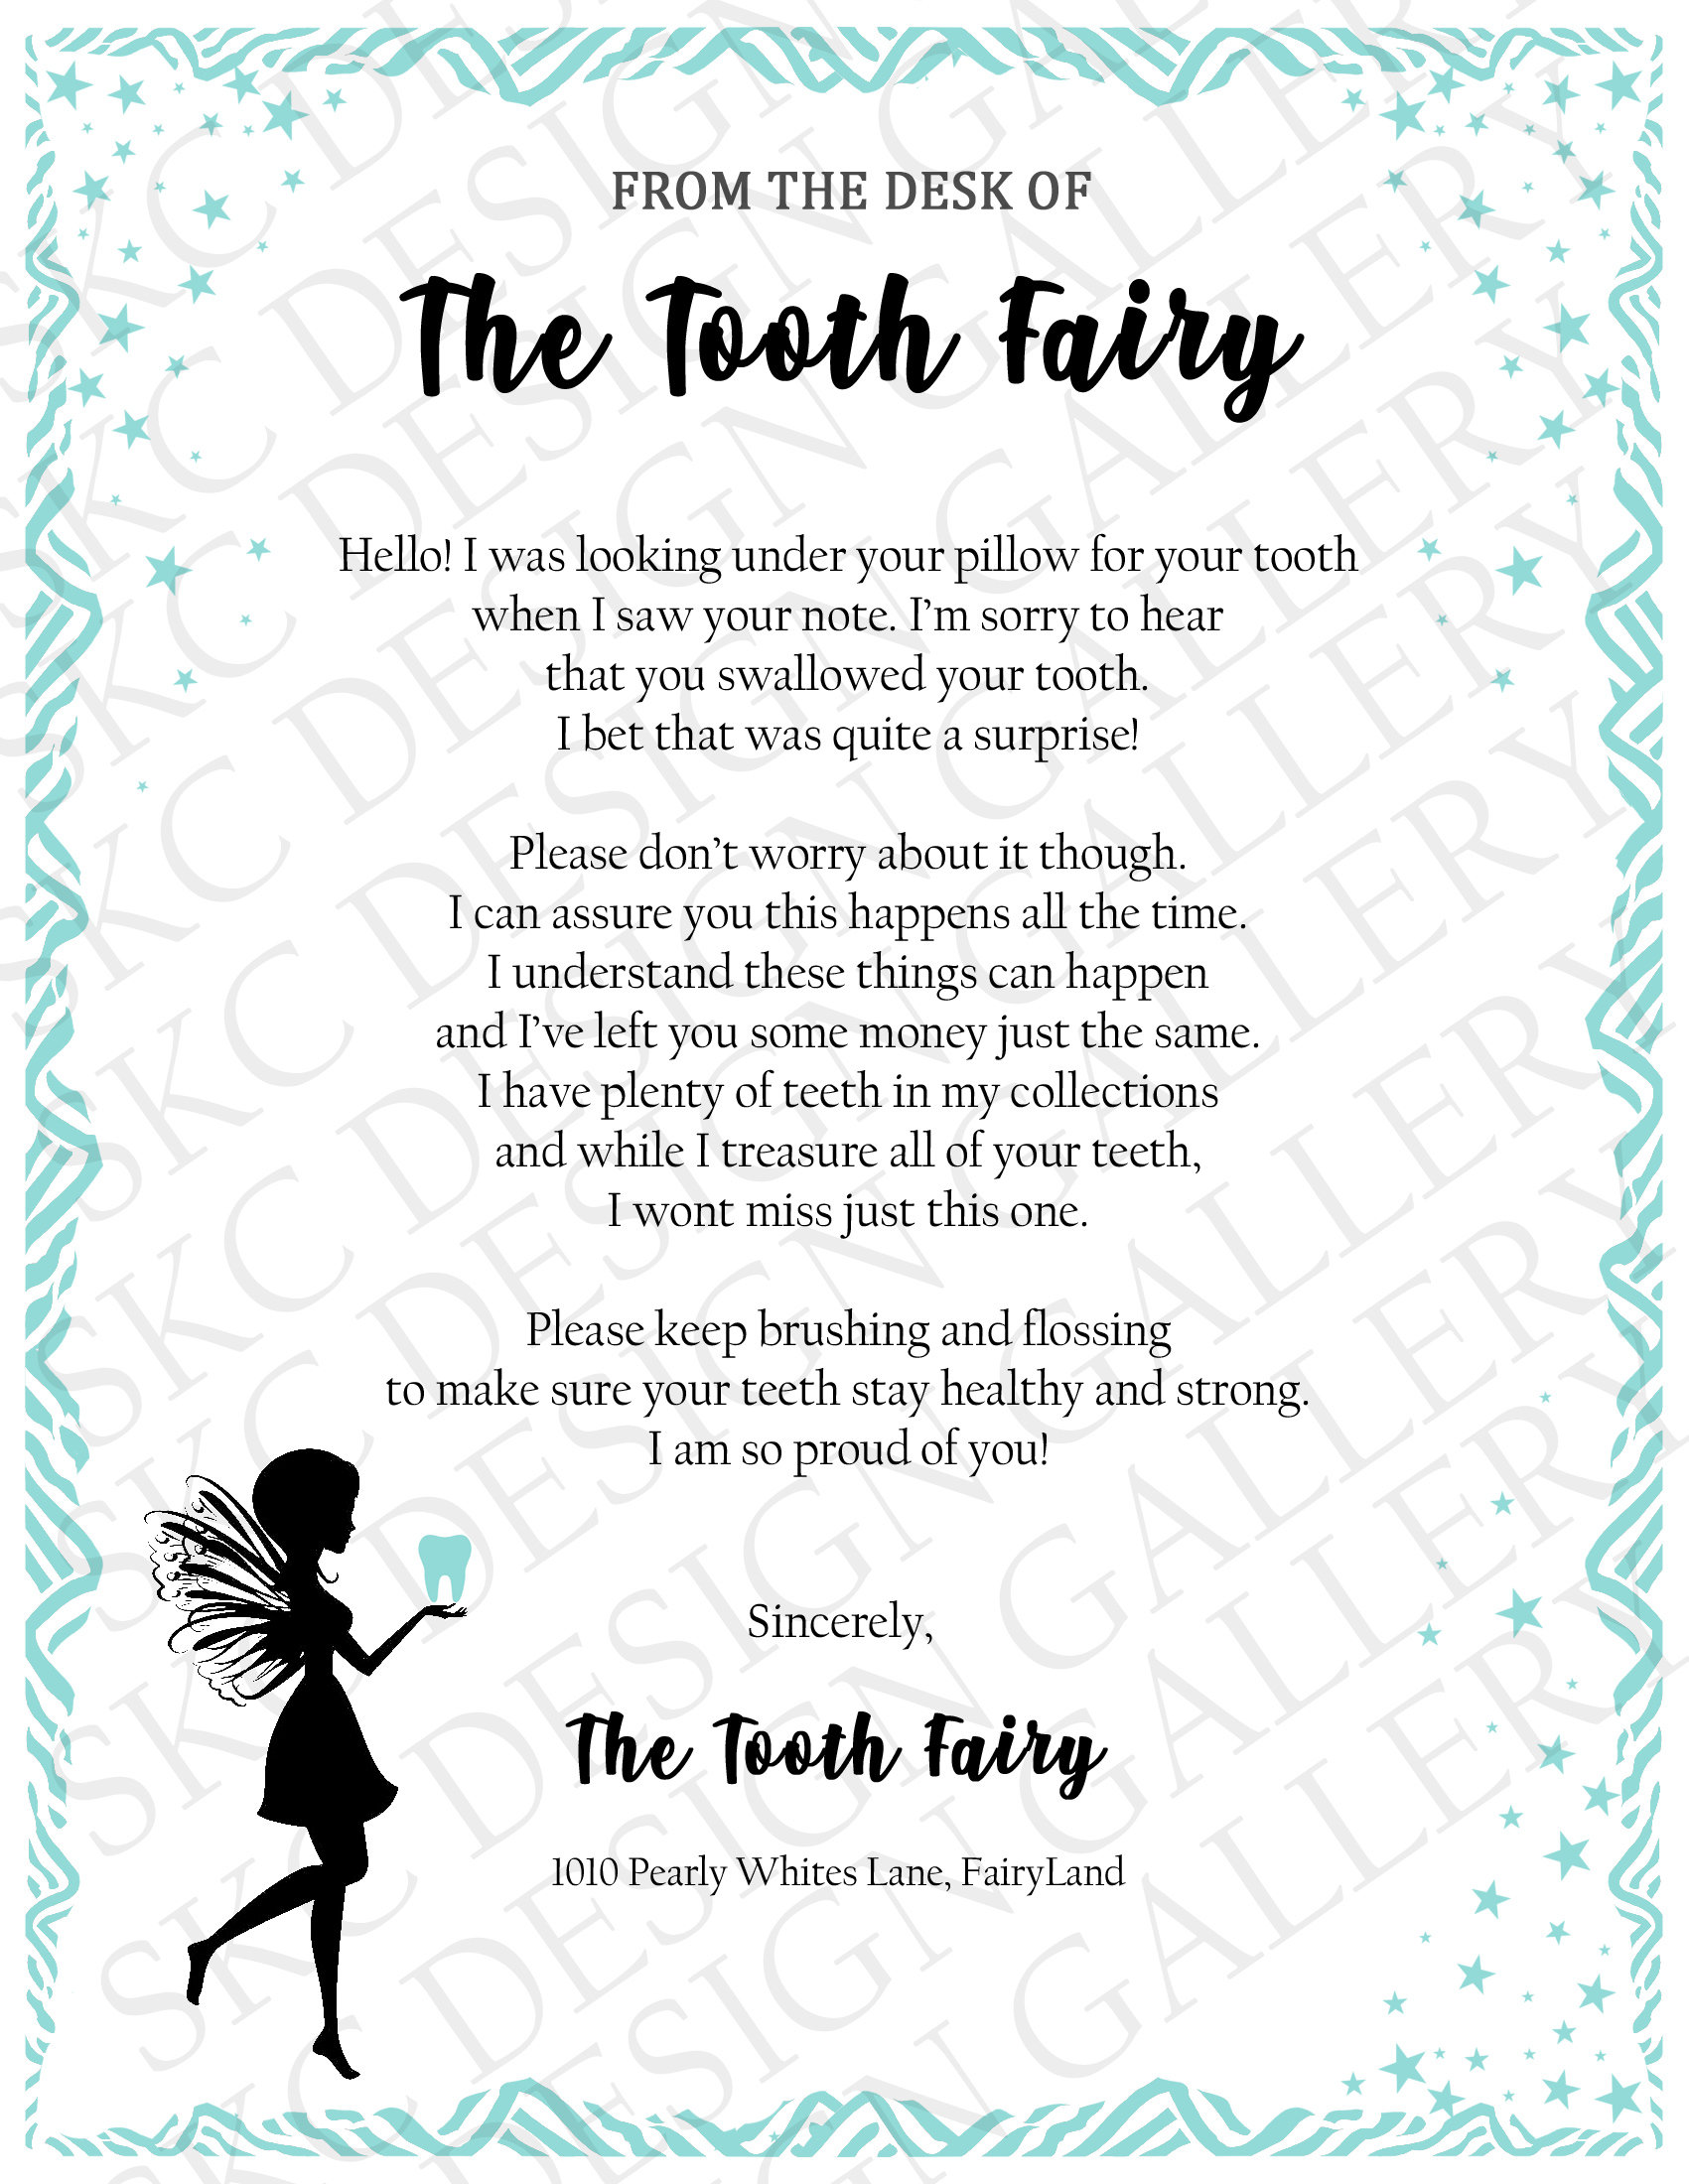 Tooth Fairy Letter Child swallowed tooth Letter from Tooth Etsy